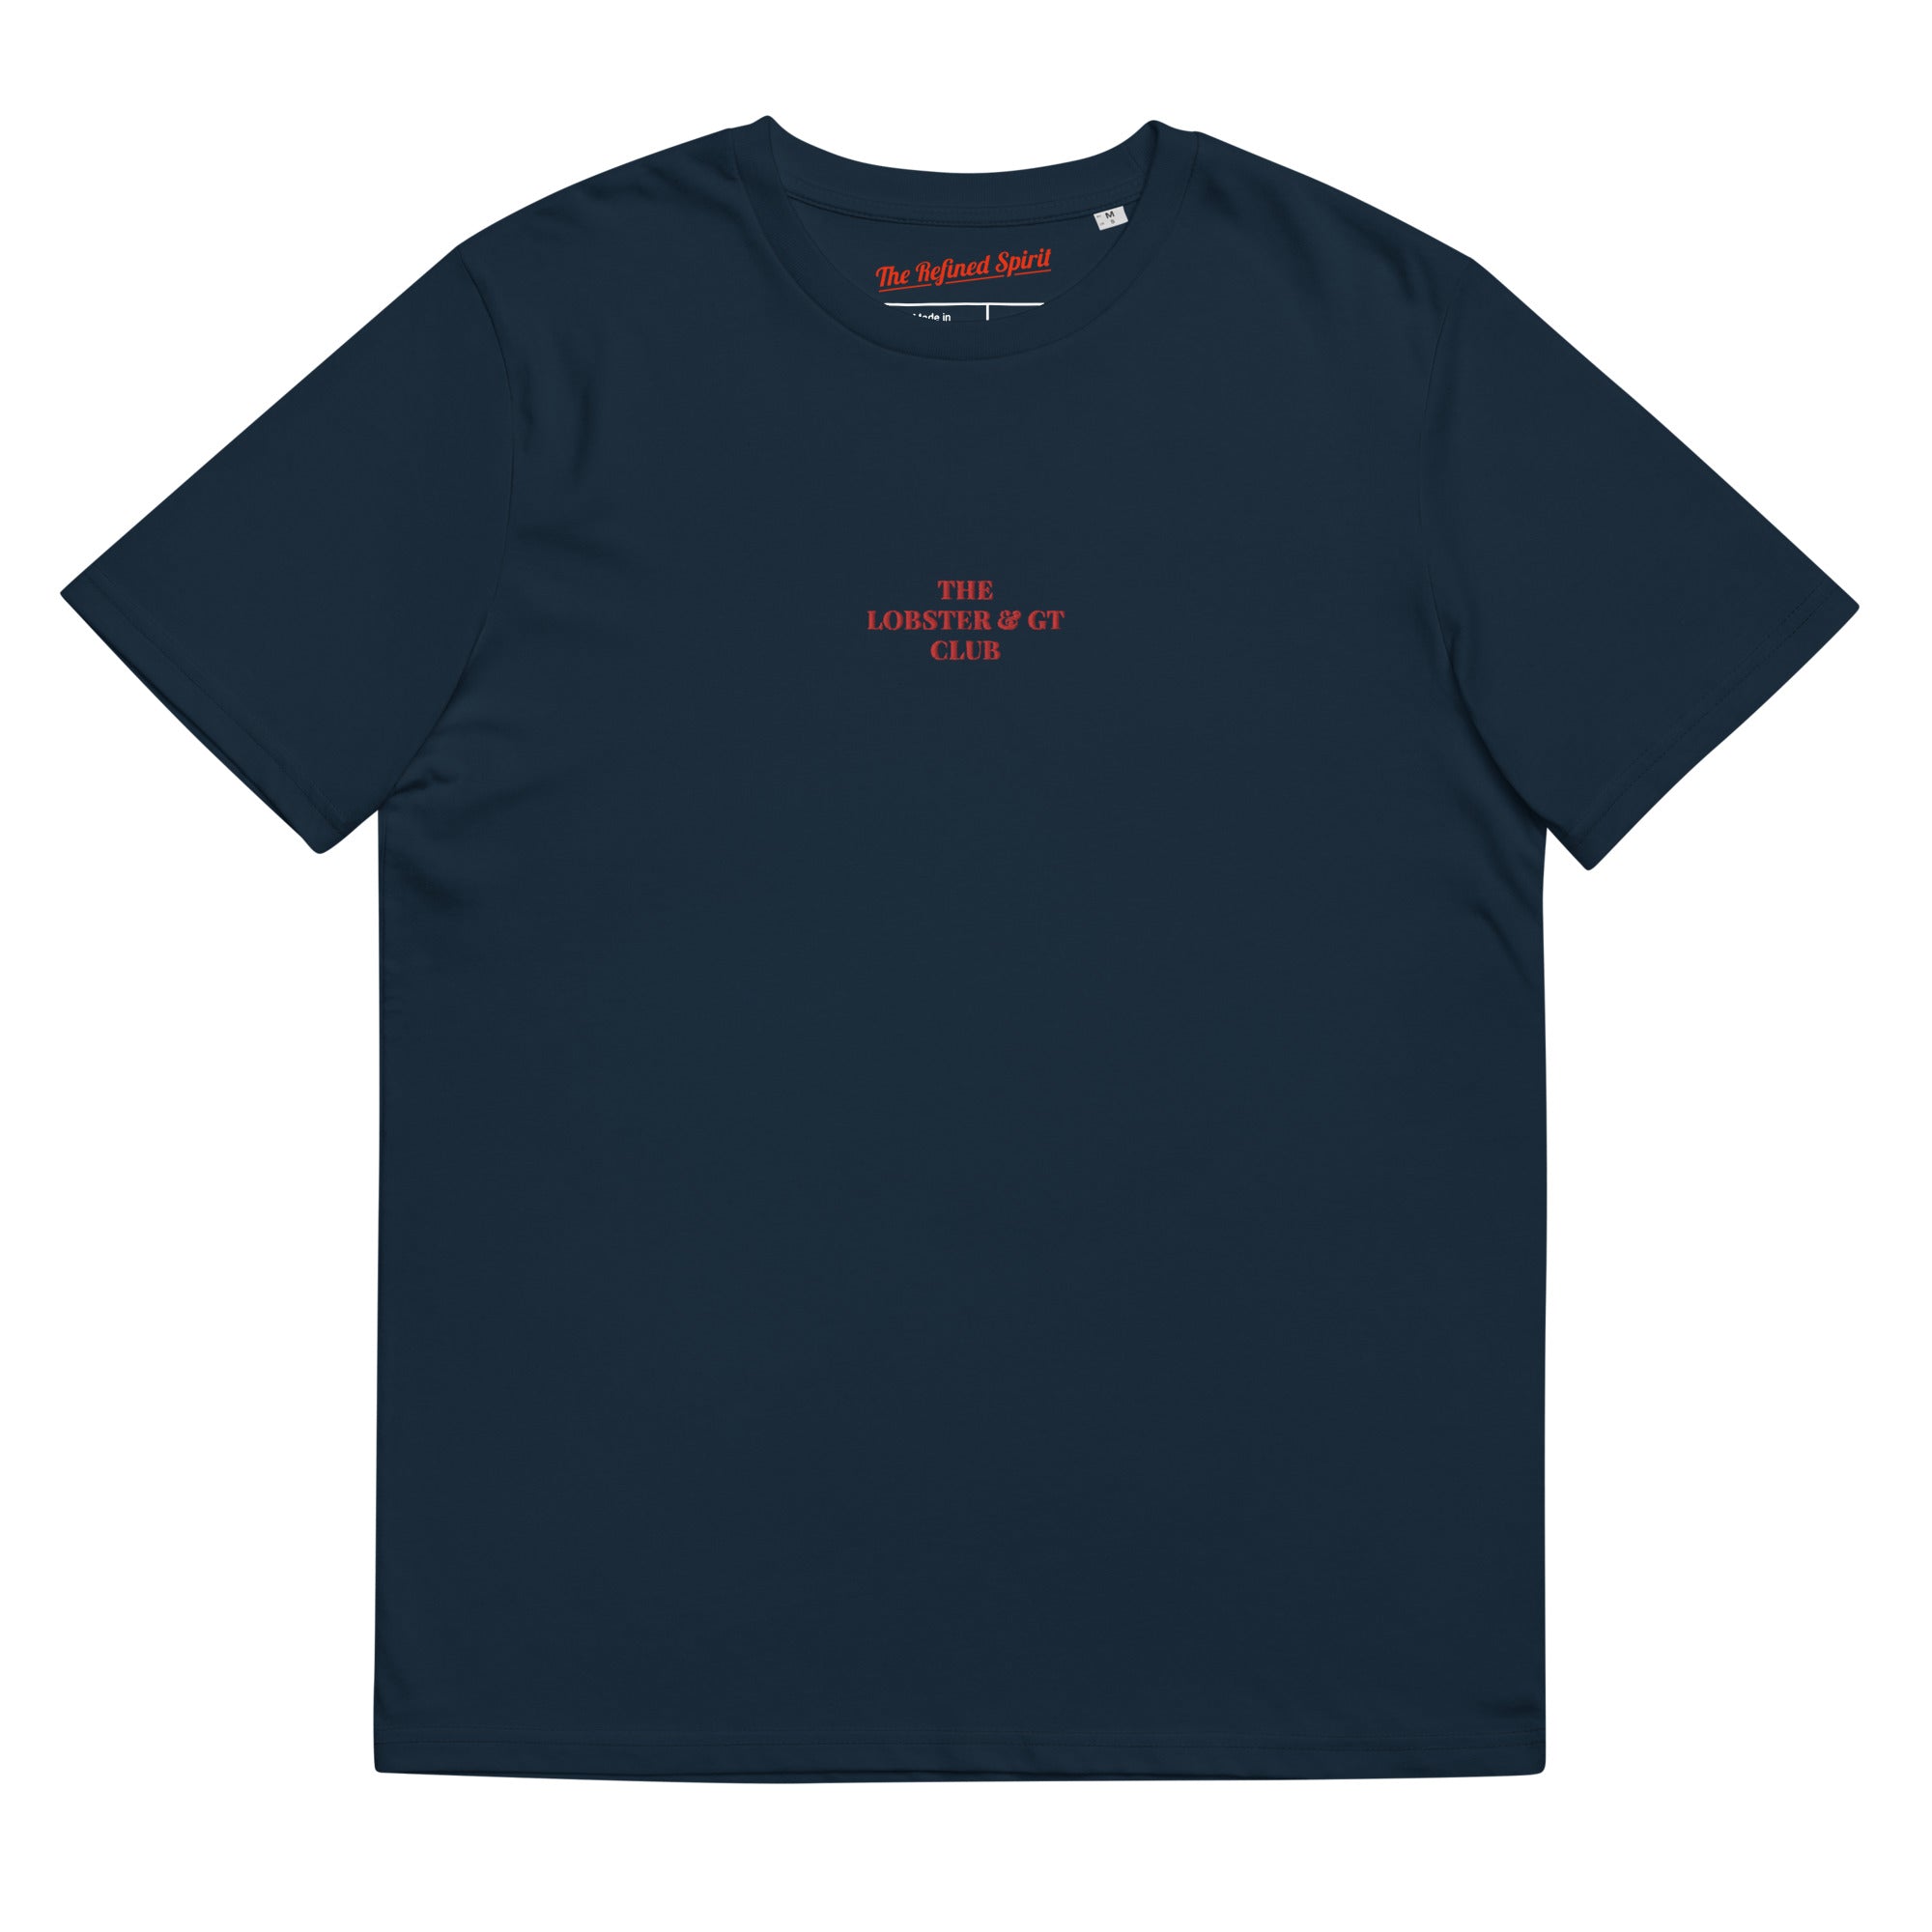 The Lobster & GT Club - Organic Embroidered T-shirt - The Refined Spirit